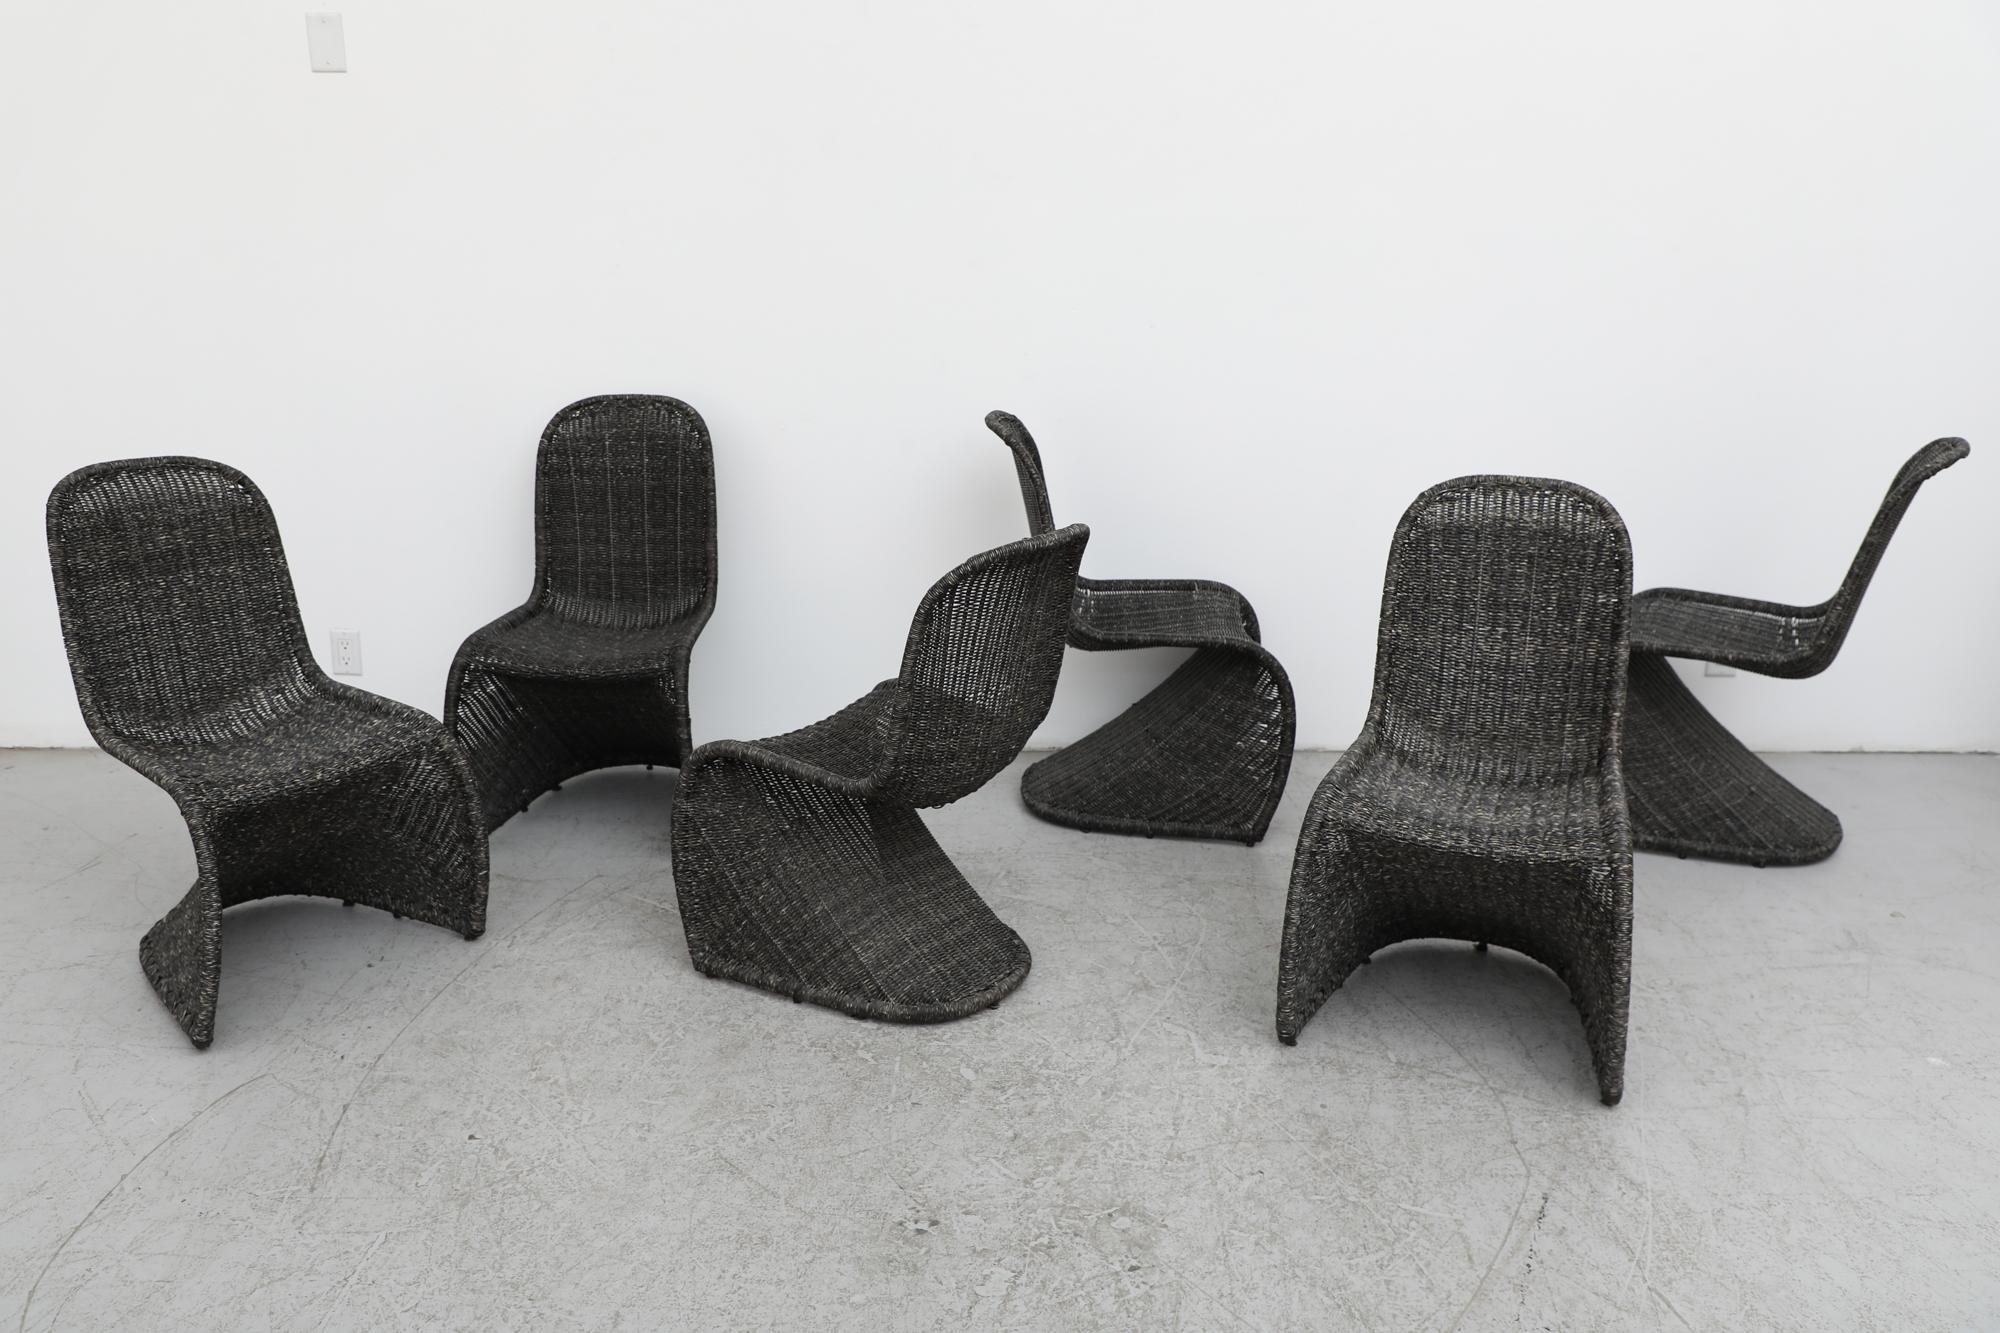 Set of six Mid-Century Verner Panton style stacking wicker rattan chairs. Reminiscent of the Panton chair which, in the annals of furniture design, is an absolute classic. That chair was designed by Verner Panton in 1959 and developed for mass